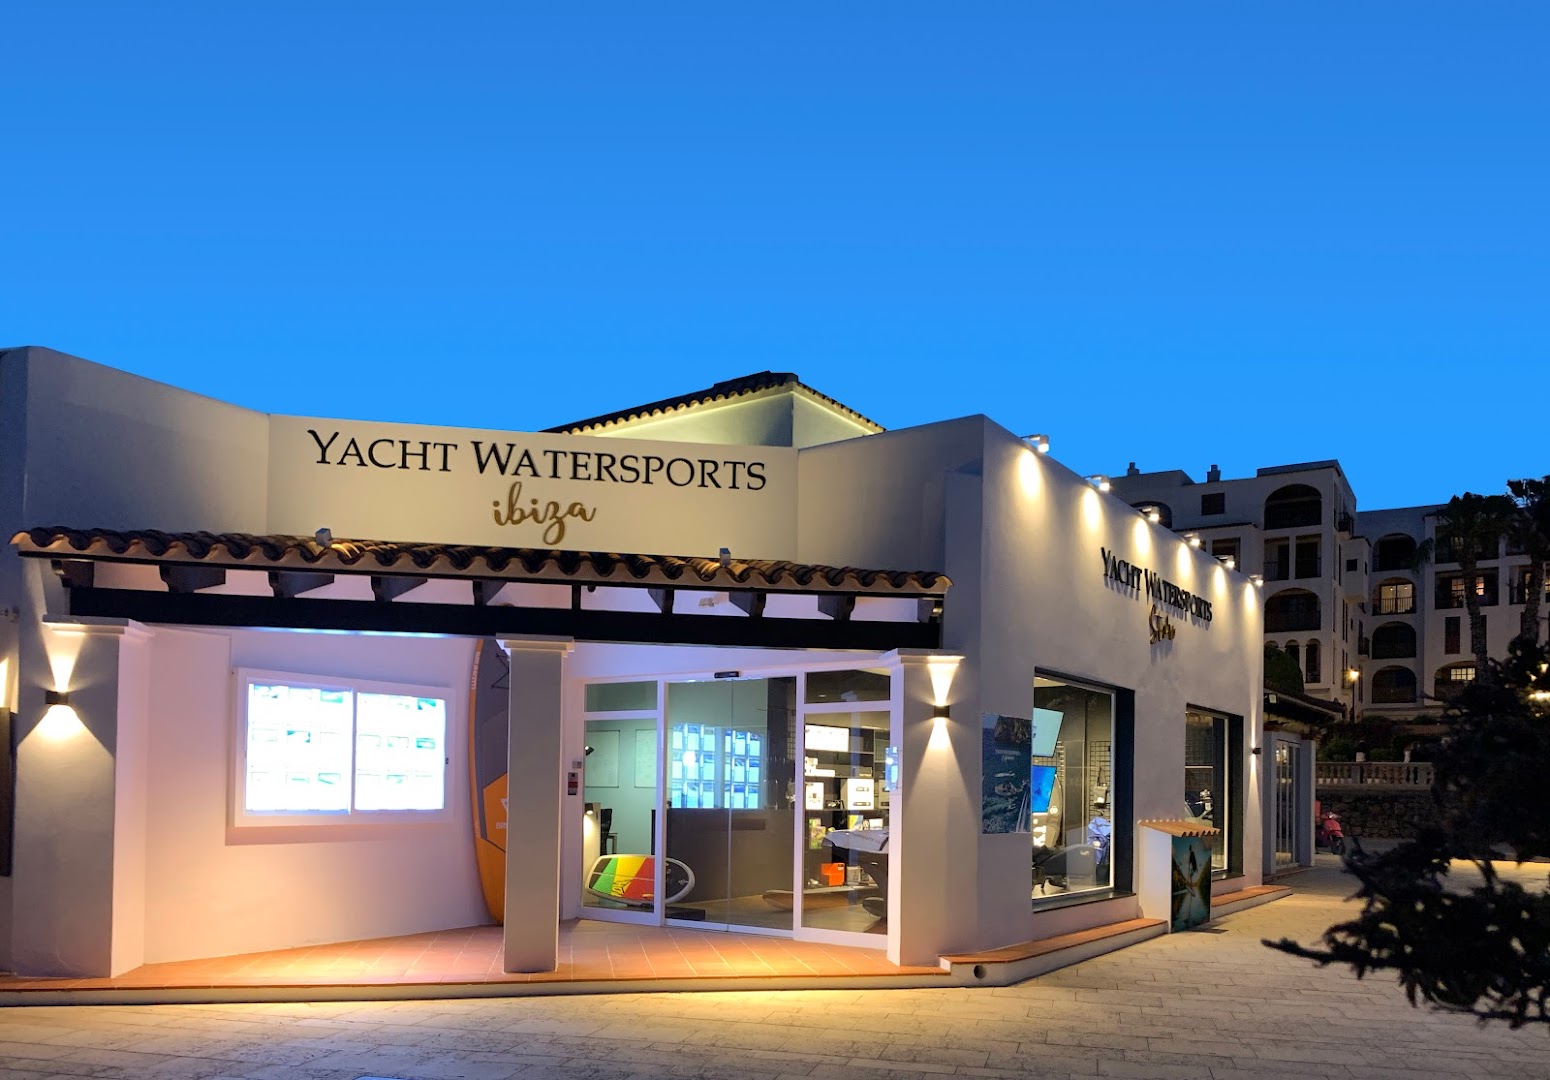 Yacht Watersports Ibiza - Store & offices